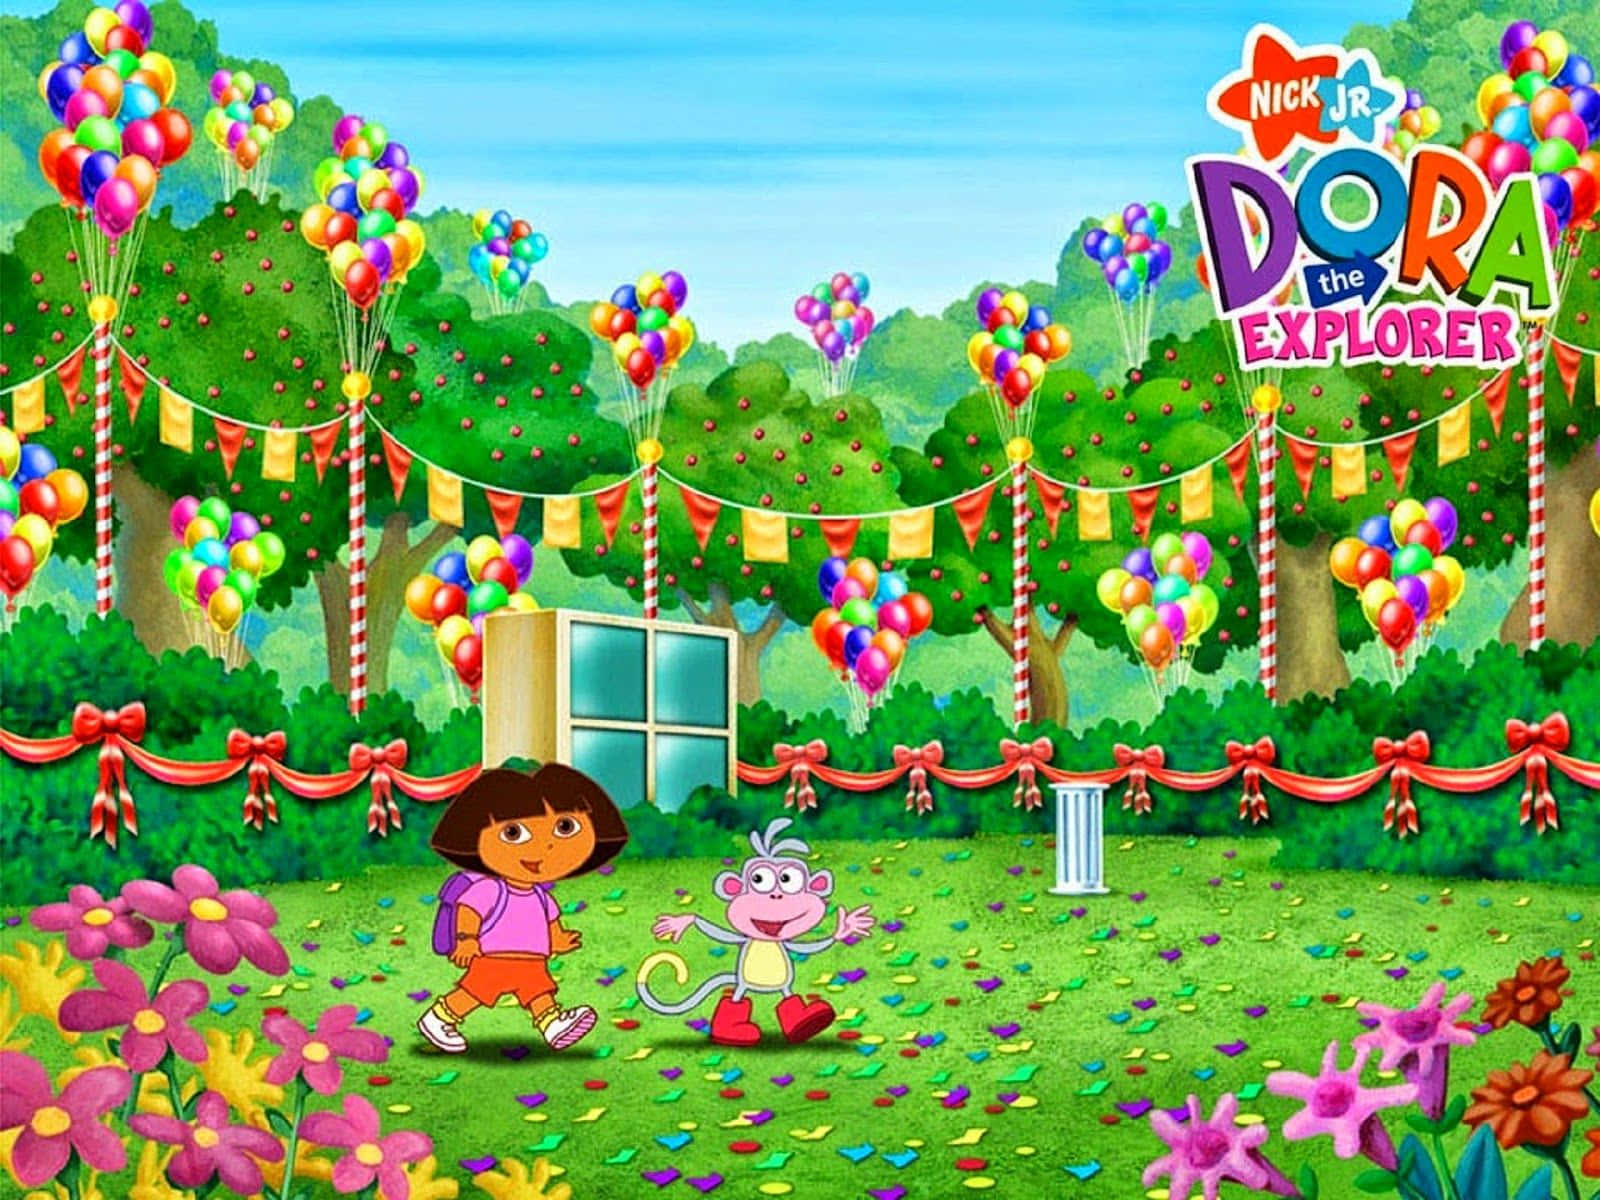 Join Dora, Boots and Friends on their Adventures!